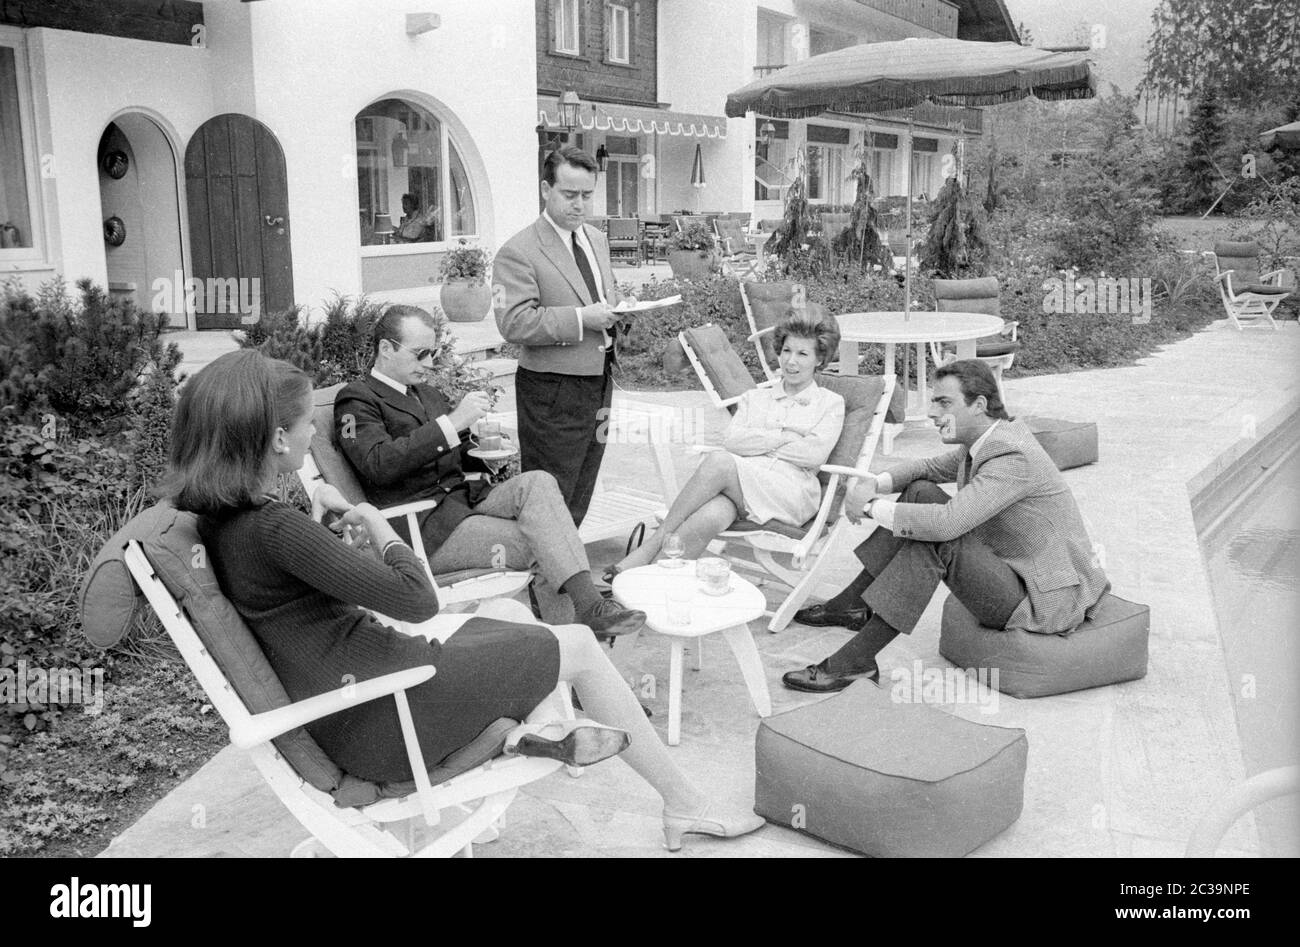 Prince Michael of Prussia (2nd from left) with his later wife Jutta (2nd from right) in the Hotel Alpina in Garmisch in 1966. Stock Photo